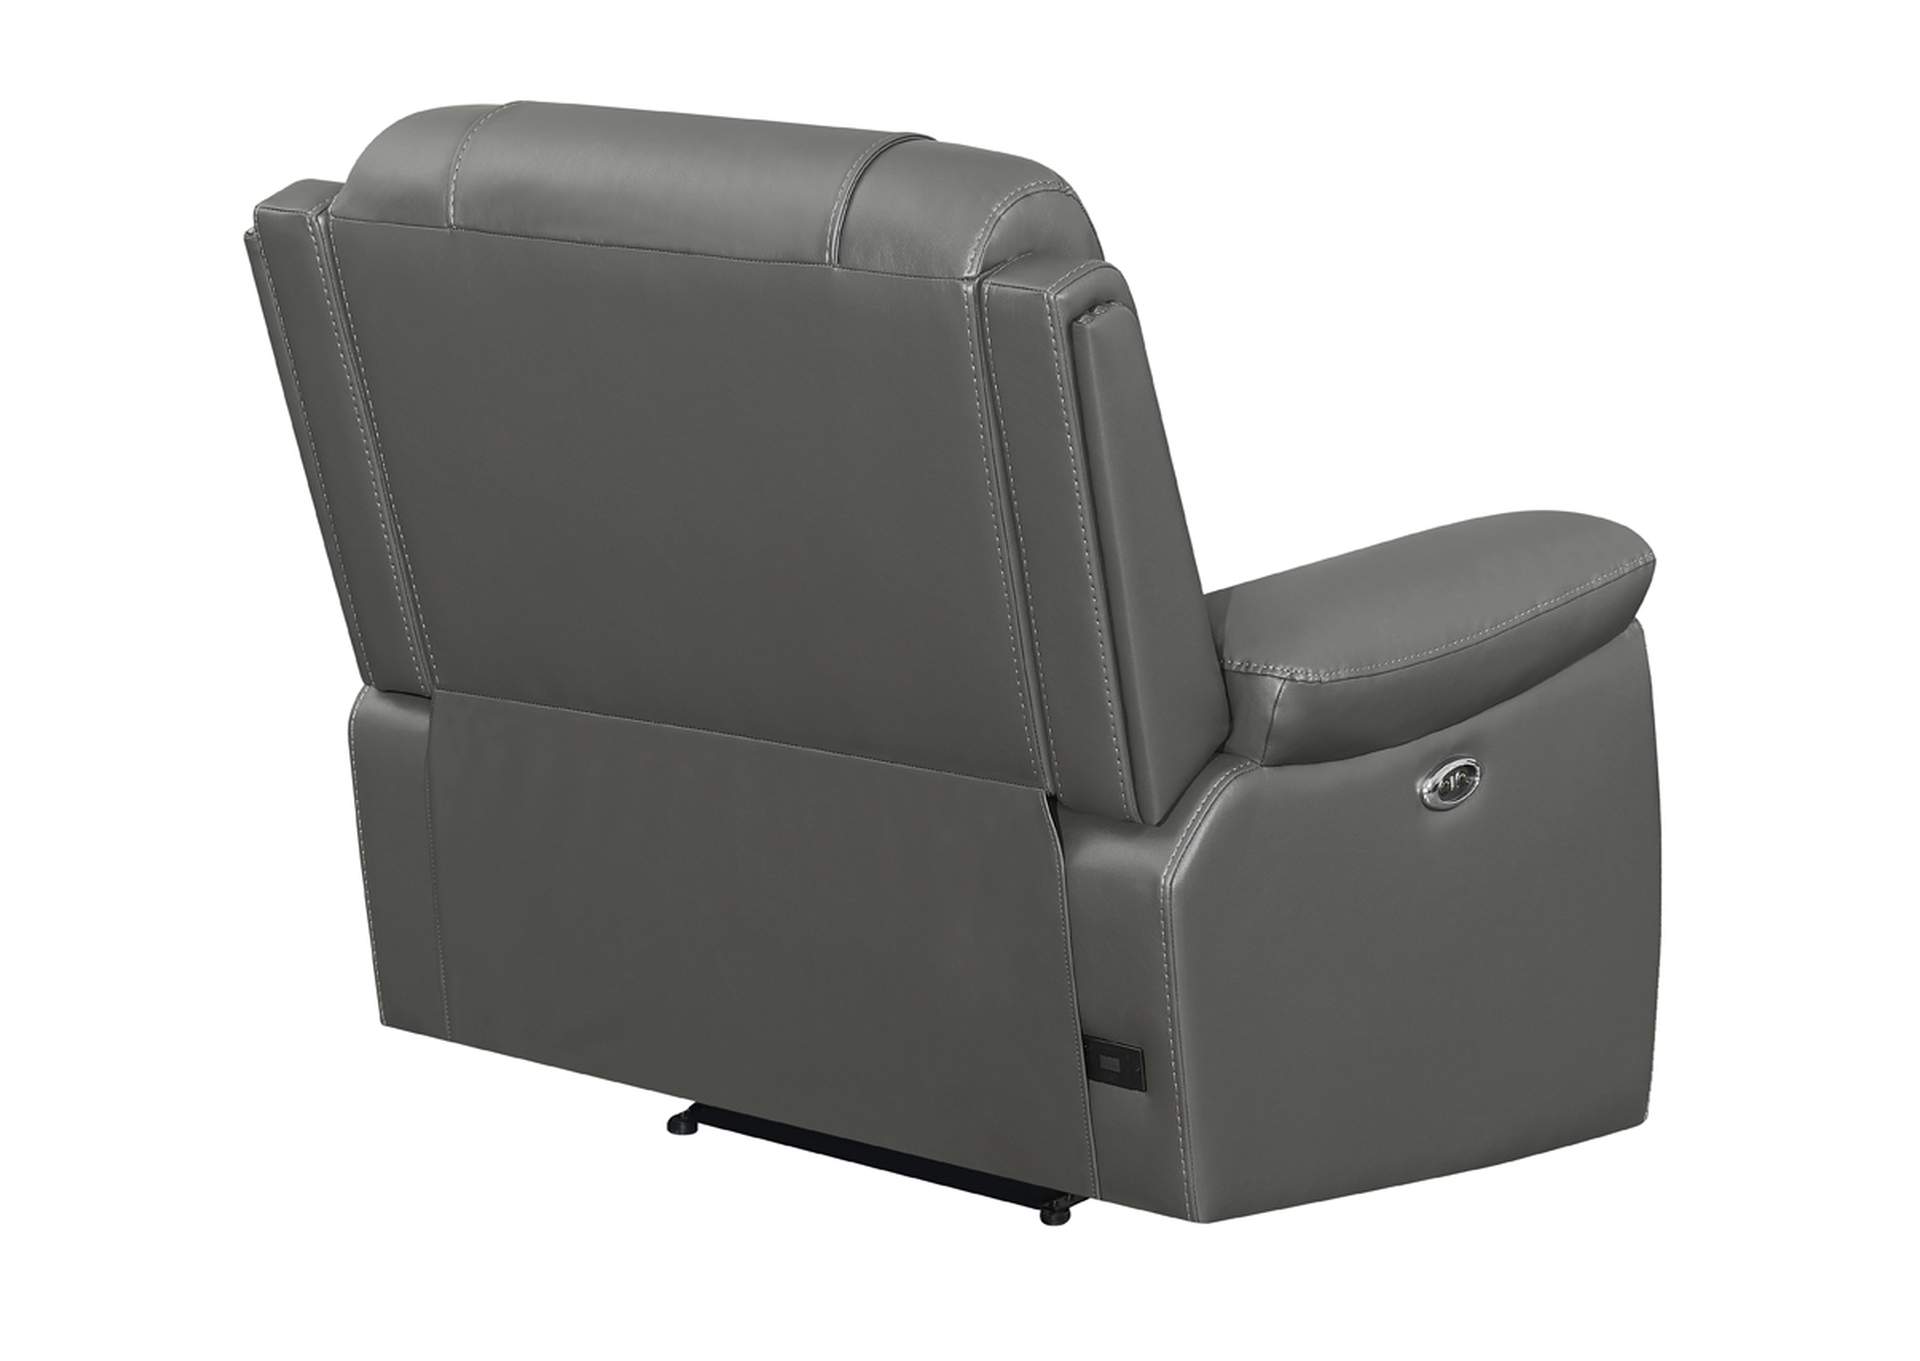 Flamenco Tufted Upholstered Power Recliner Charcoal,Coaster Furniture